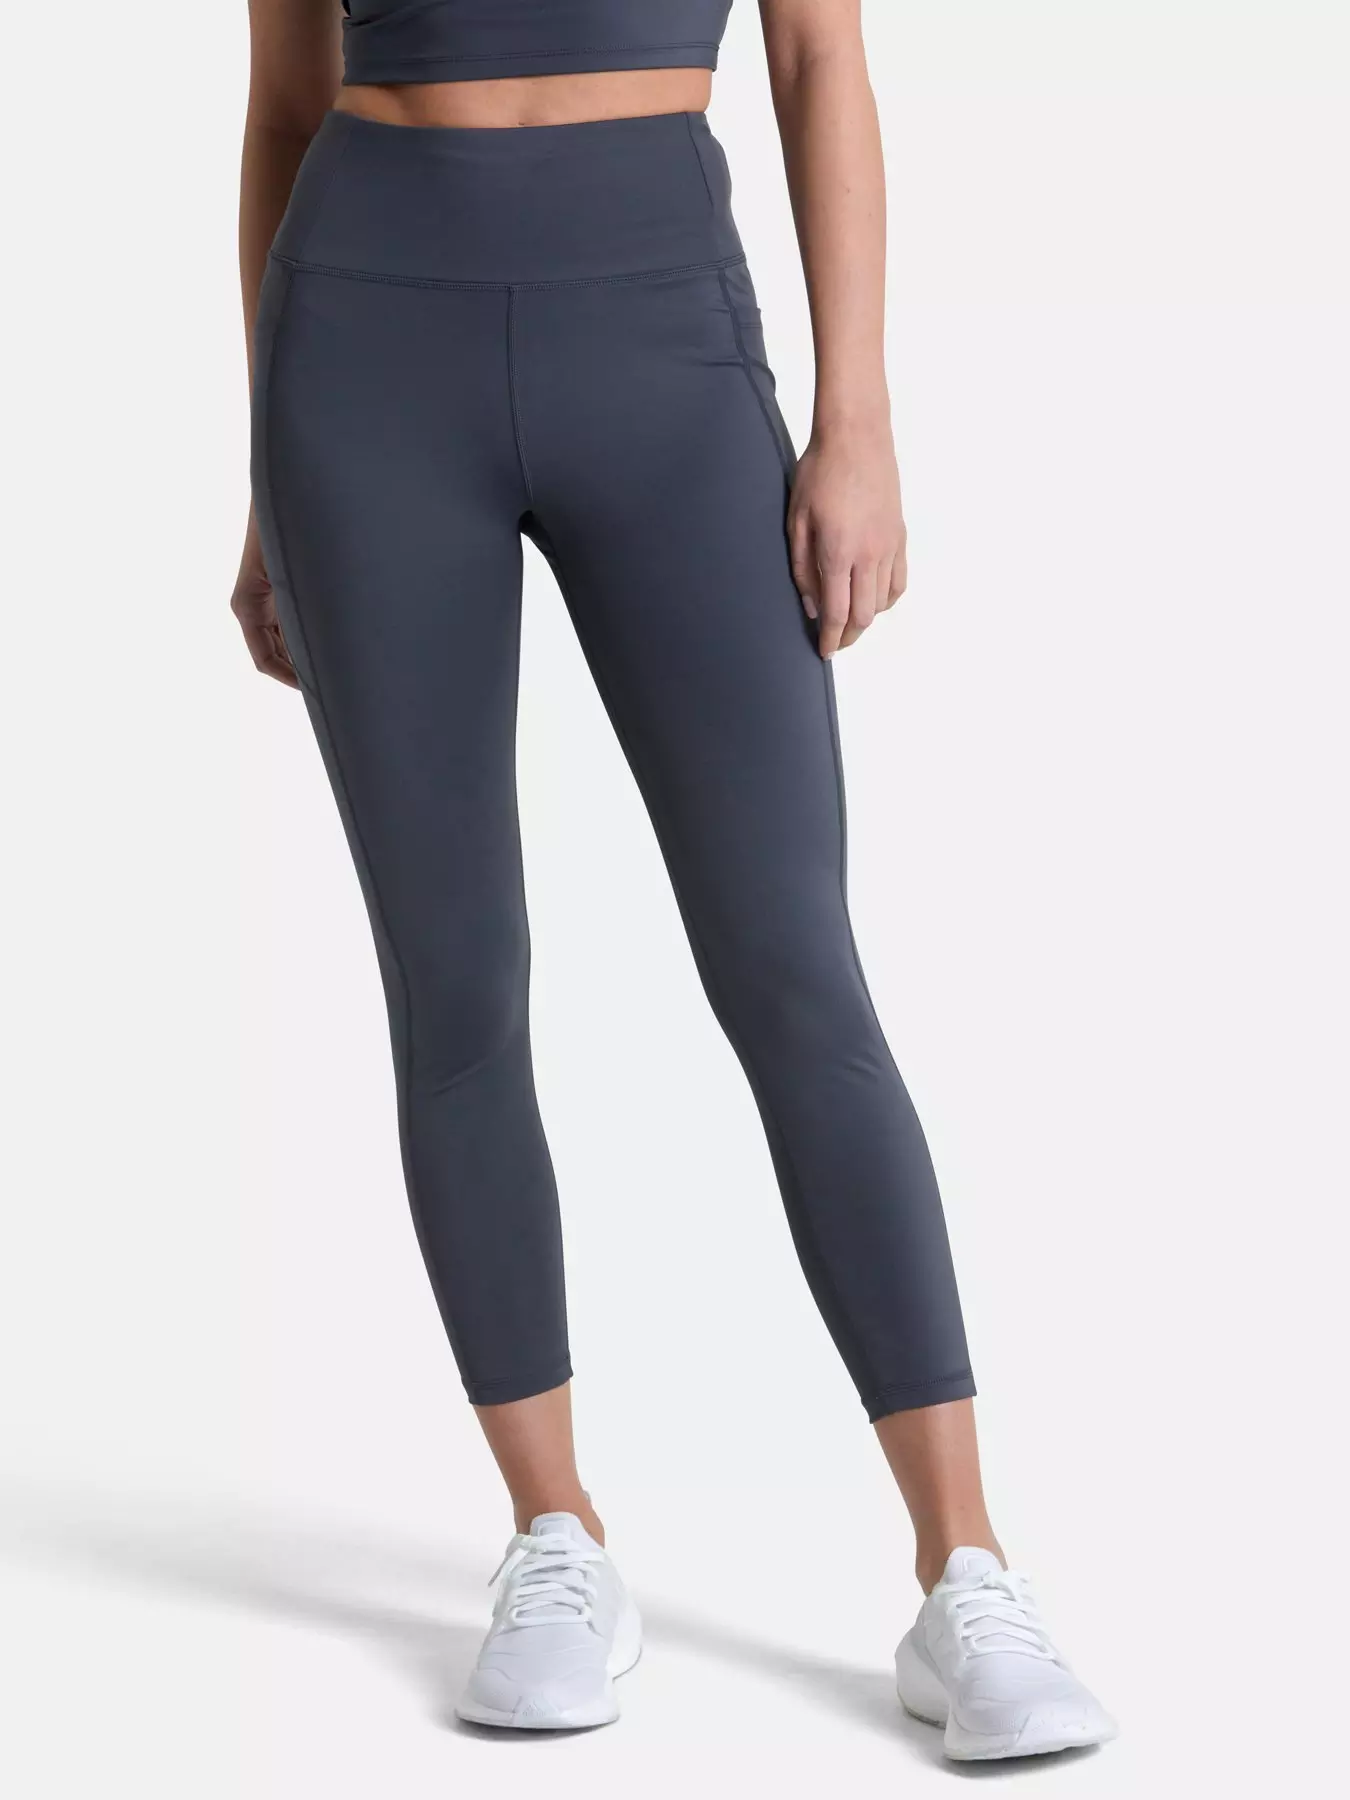 Buy Lululemon Invigorate High-rise Tights 28 - Blue At 22% Off